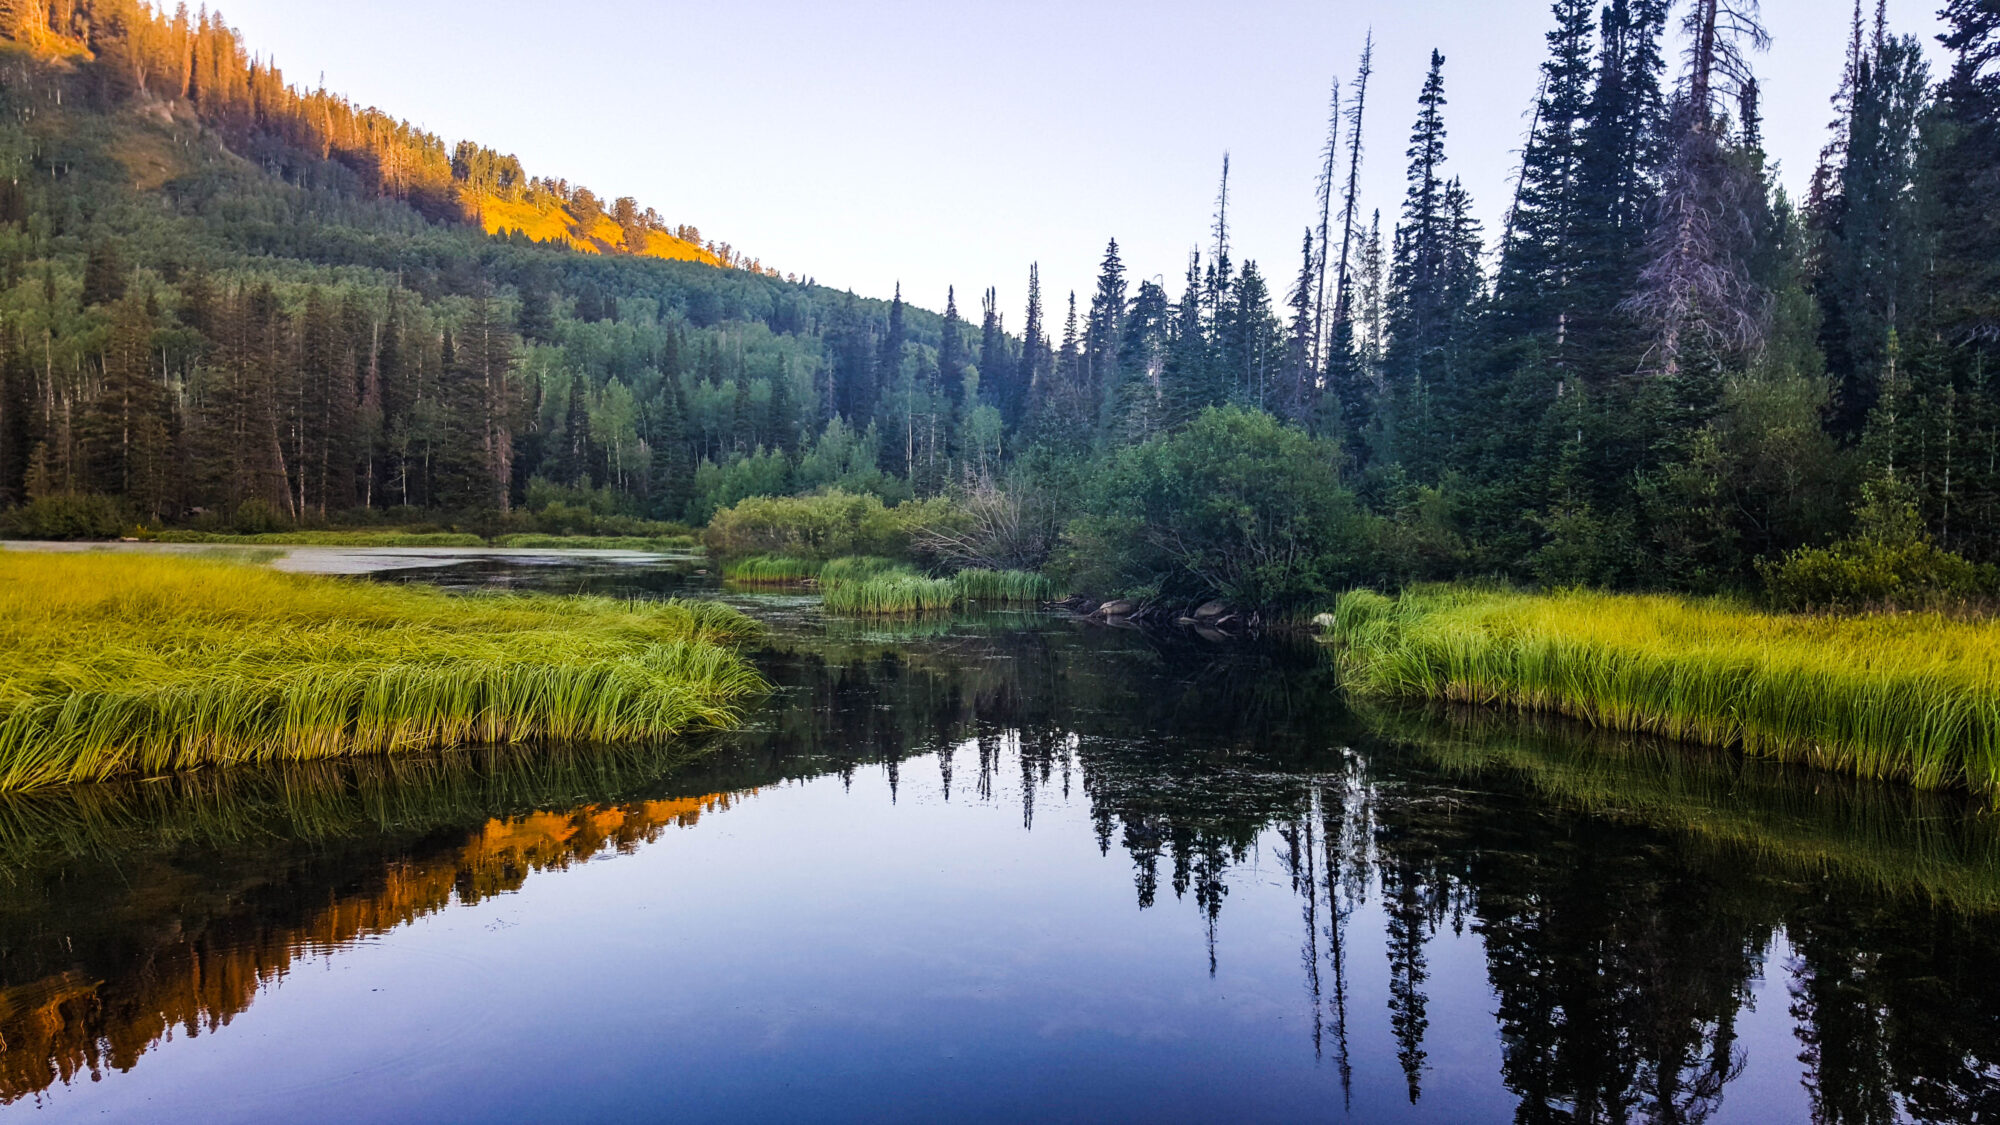 Silver Lake, Uinta-Wasatch-Cache National Forest, Utah